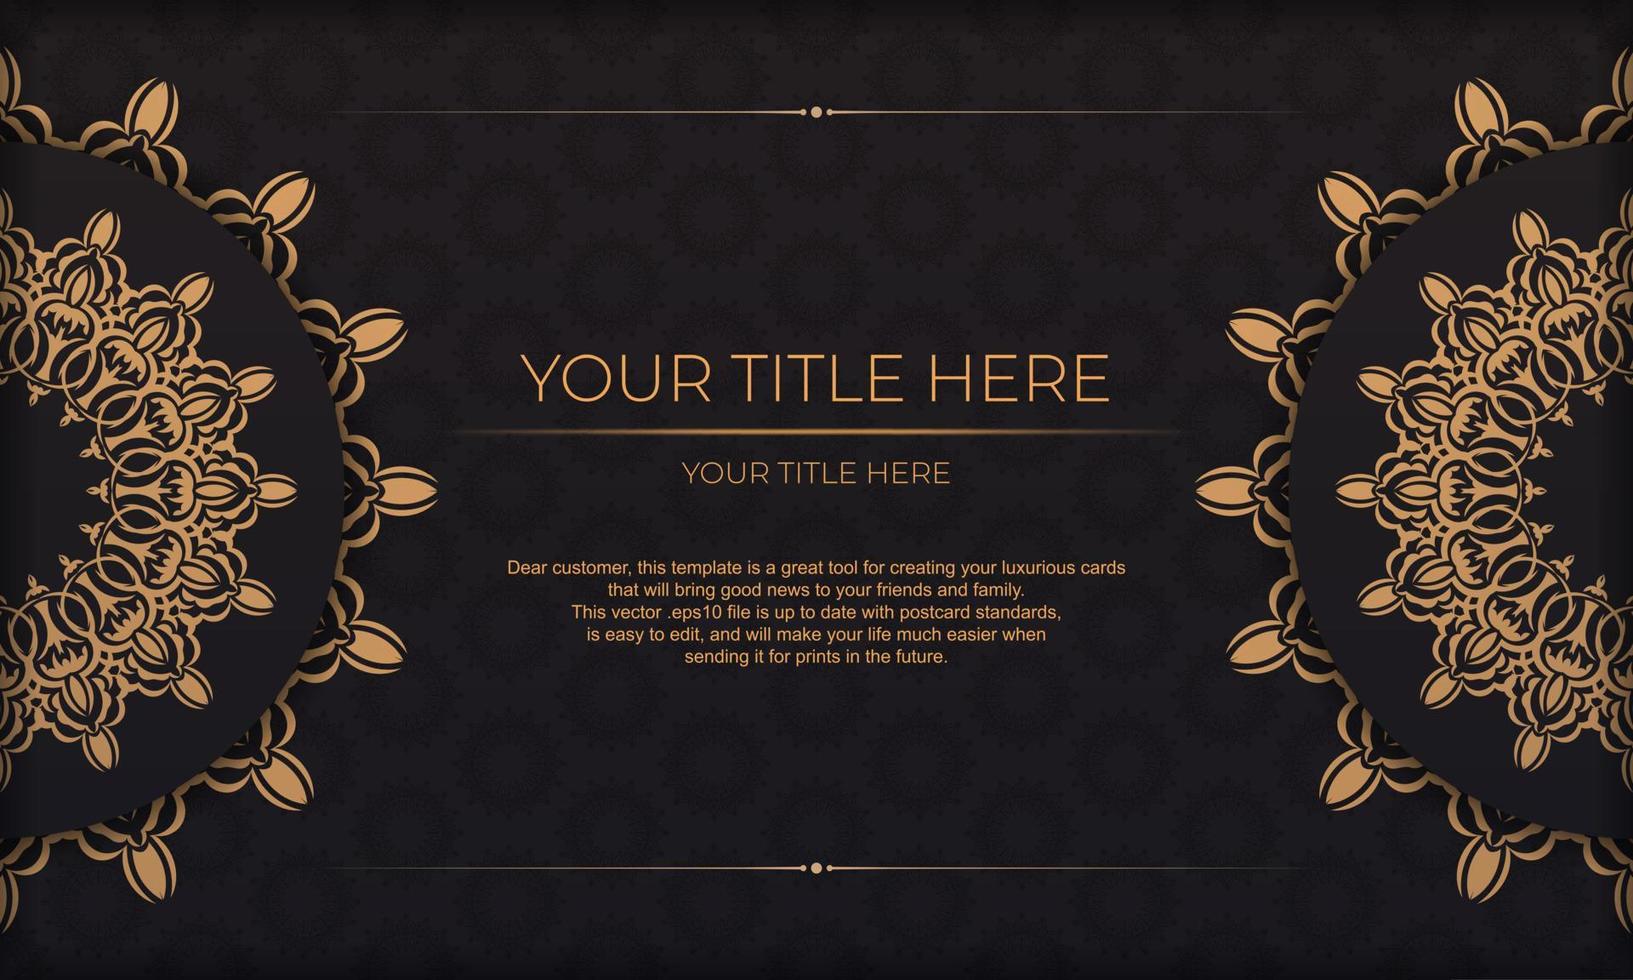 Luxury vector background with vintage ornaments and place for your design. Invitation card design with mandala ornament.